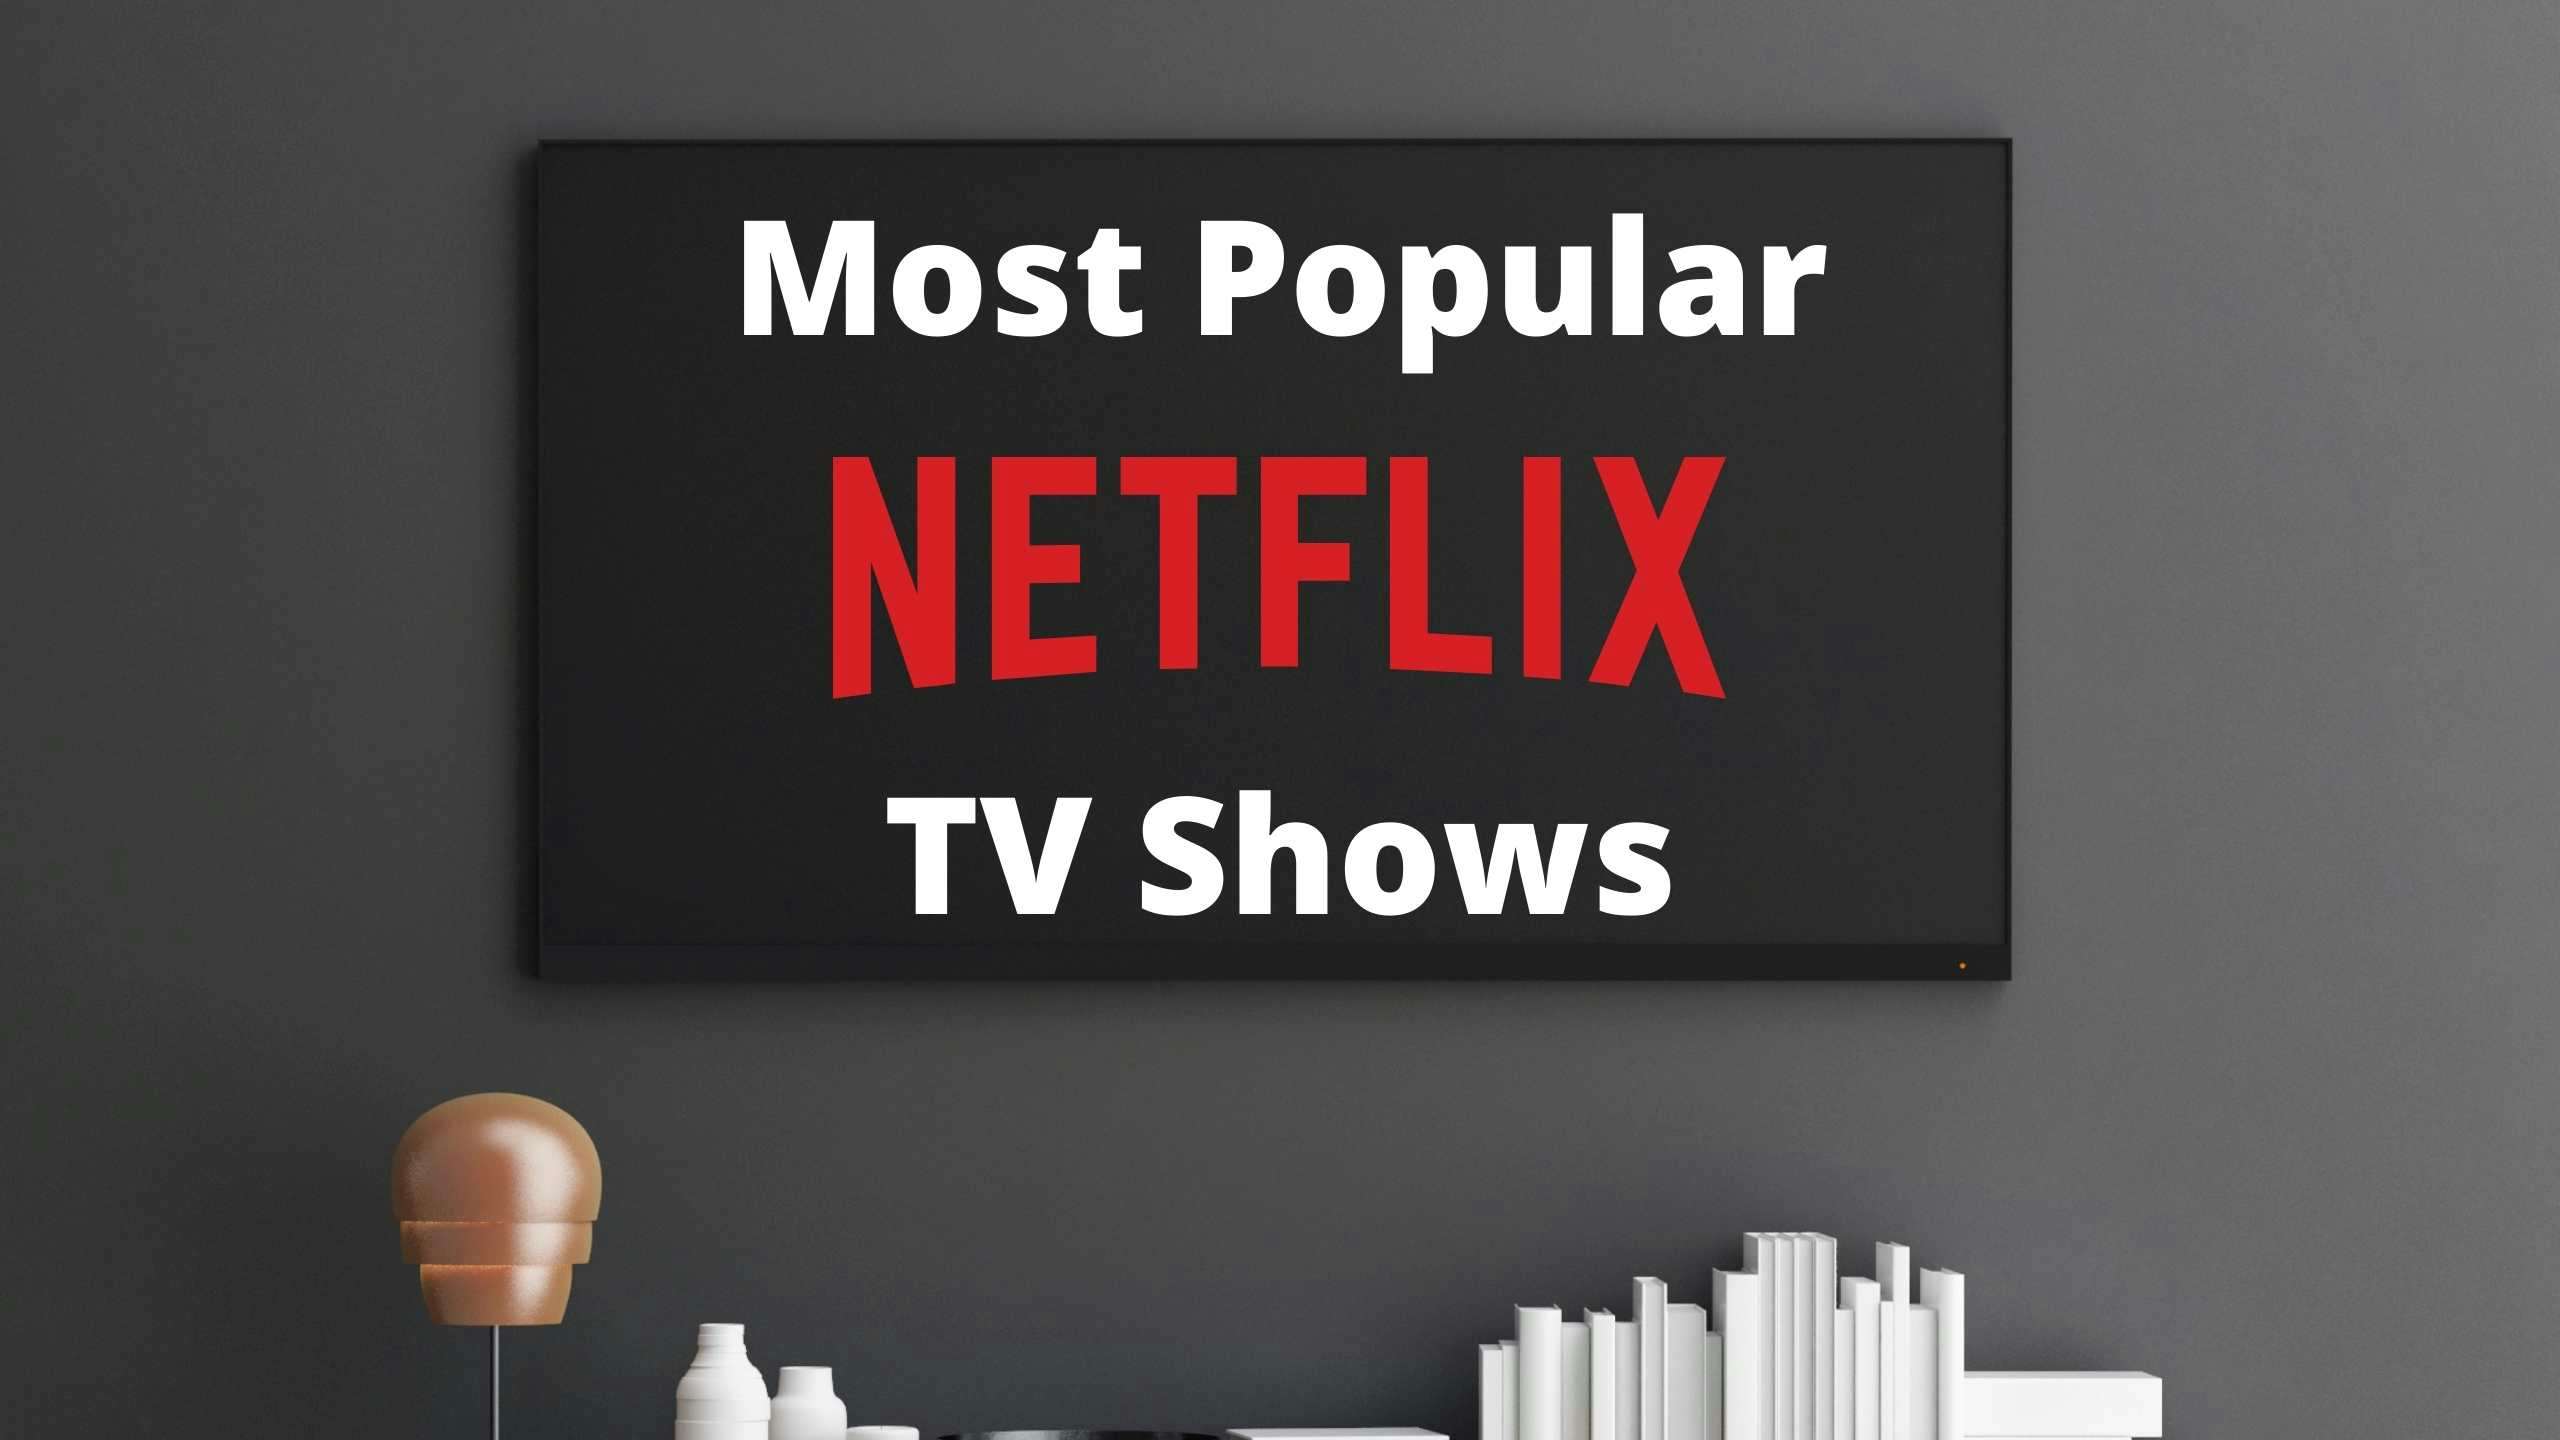 List of Most Popular TV Shows  on Netflix as of 2021 - Thumbnail